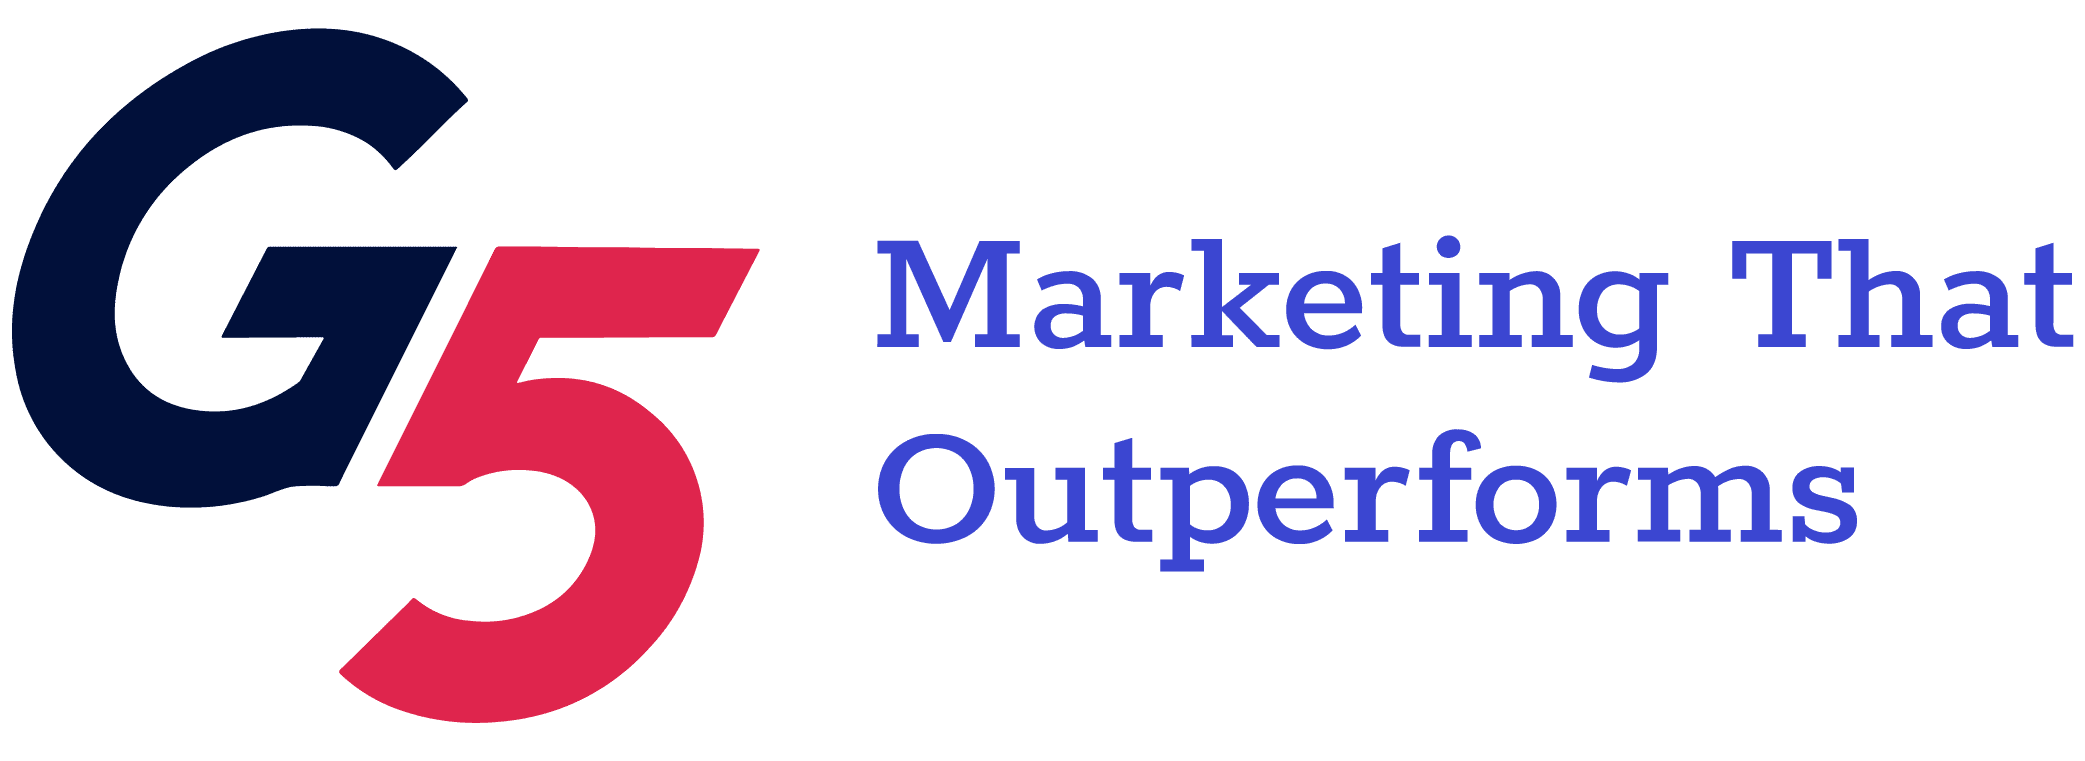 G5 marketing that outperforms logo